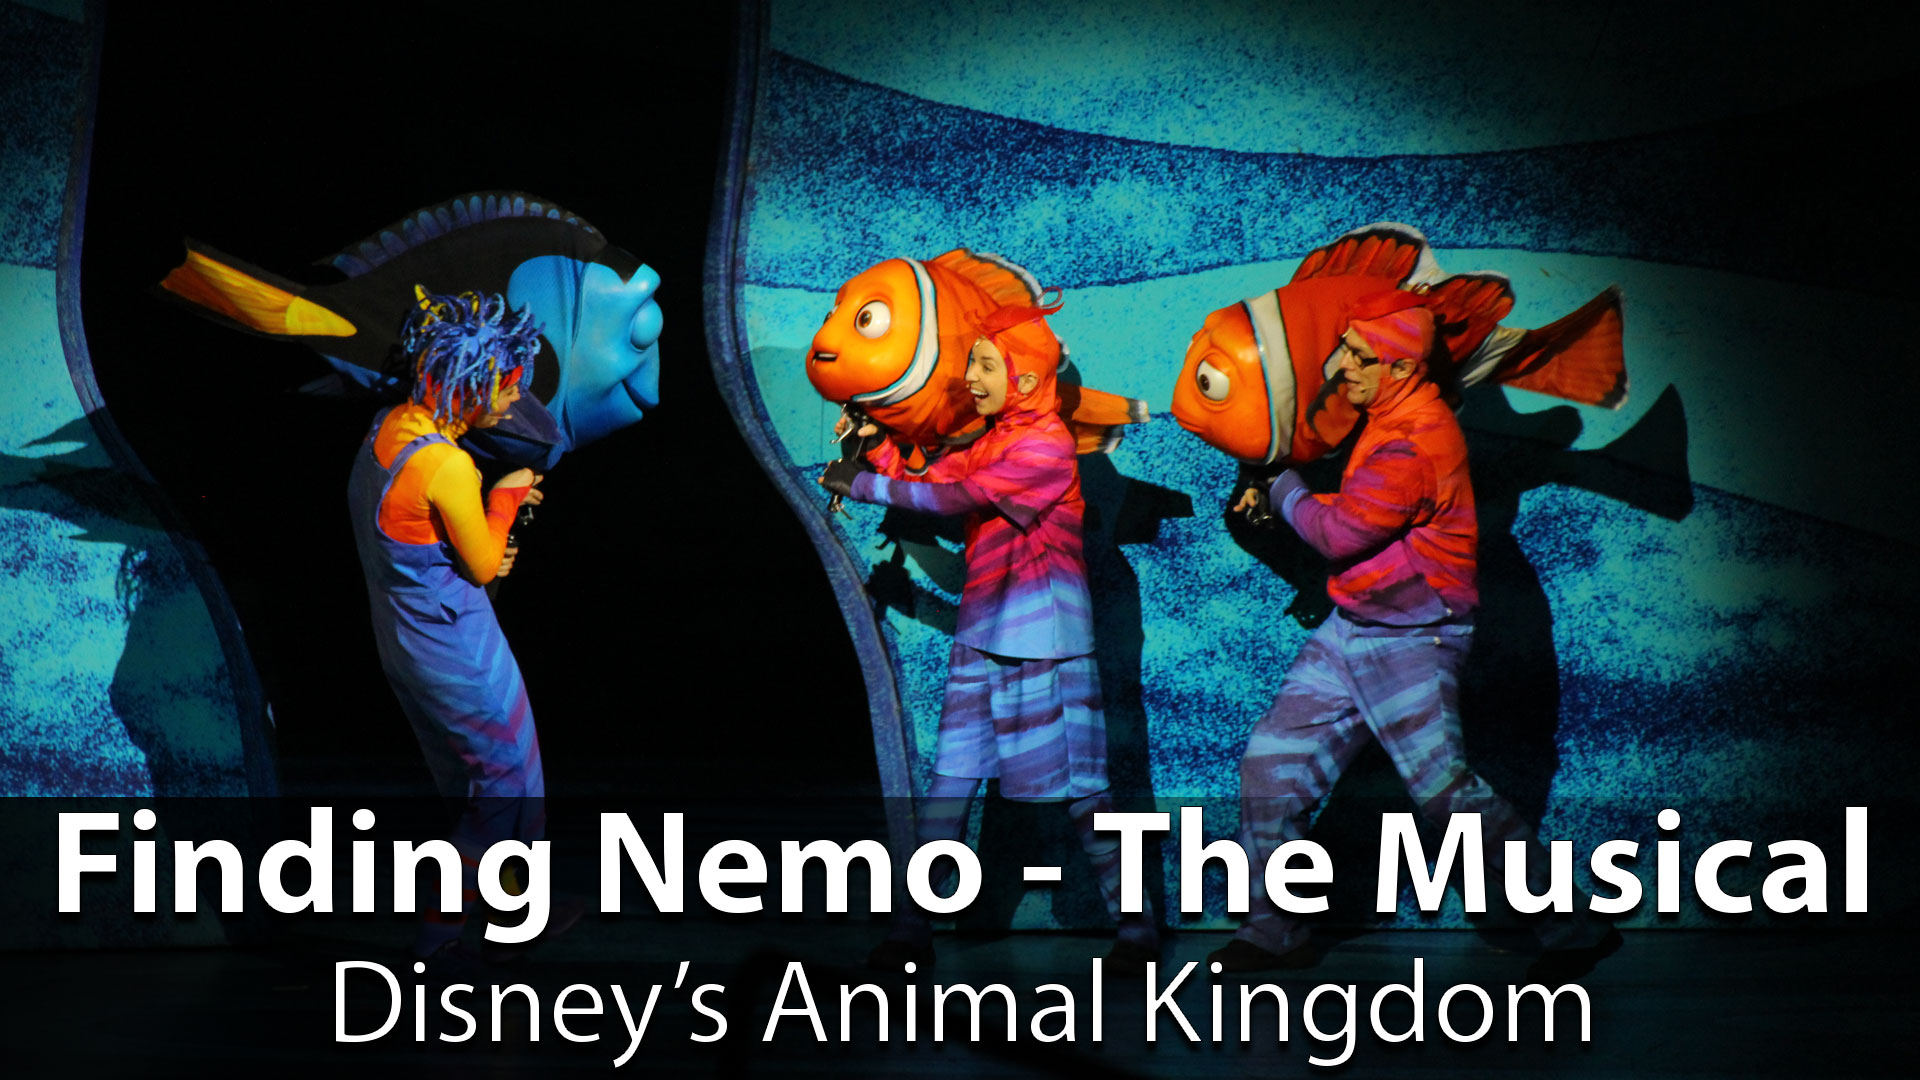 Finding Nemo – The Musical at Disney’s Animal Kingdom